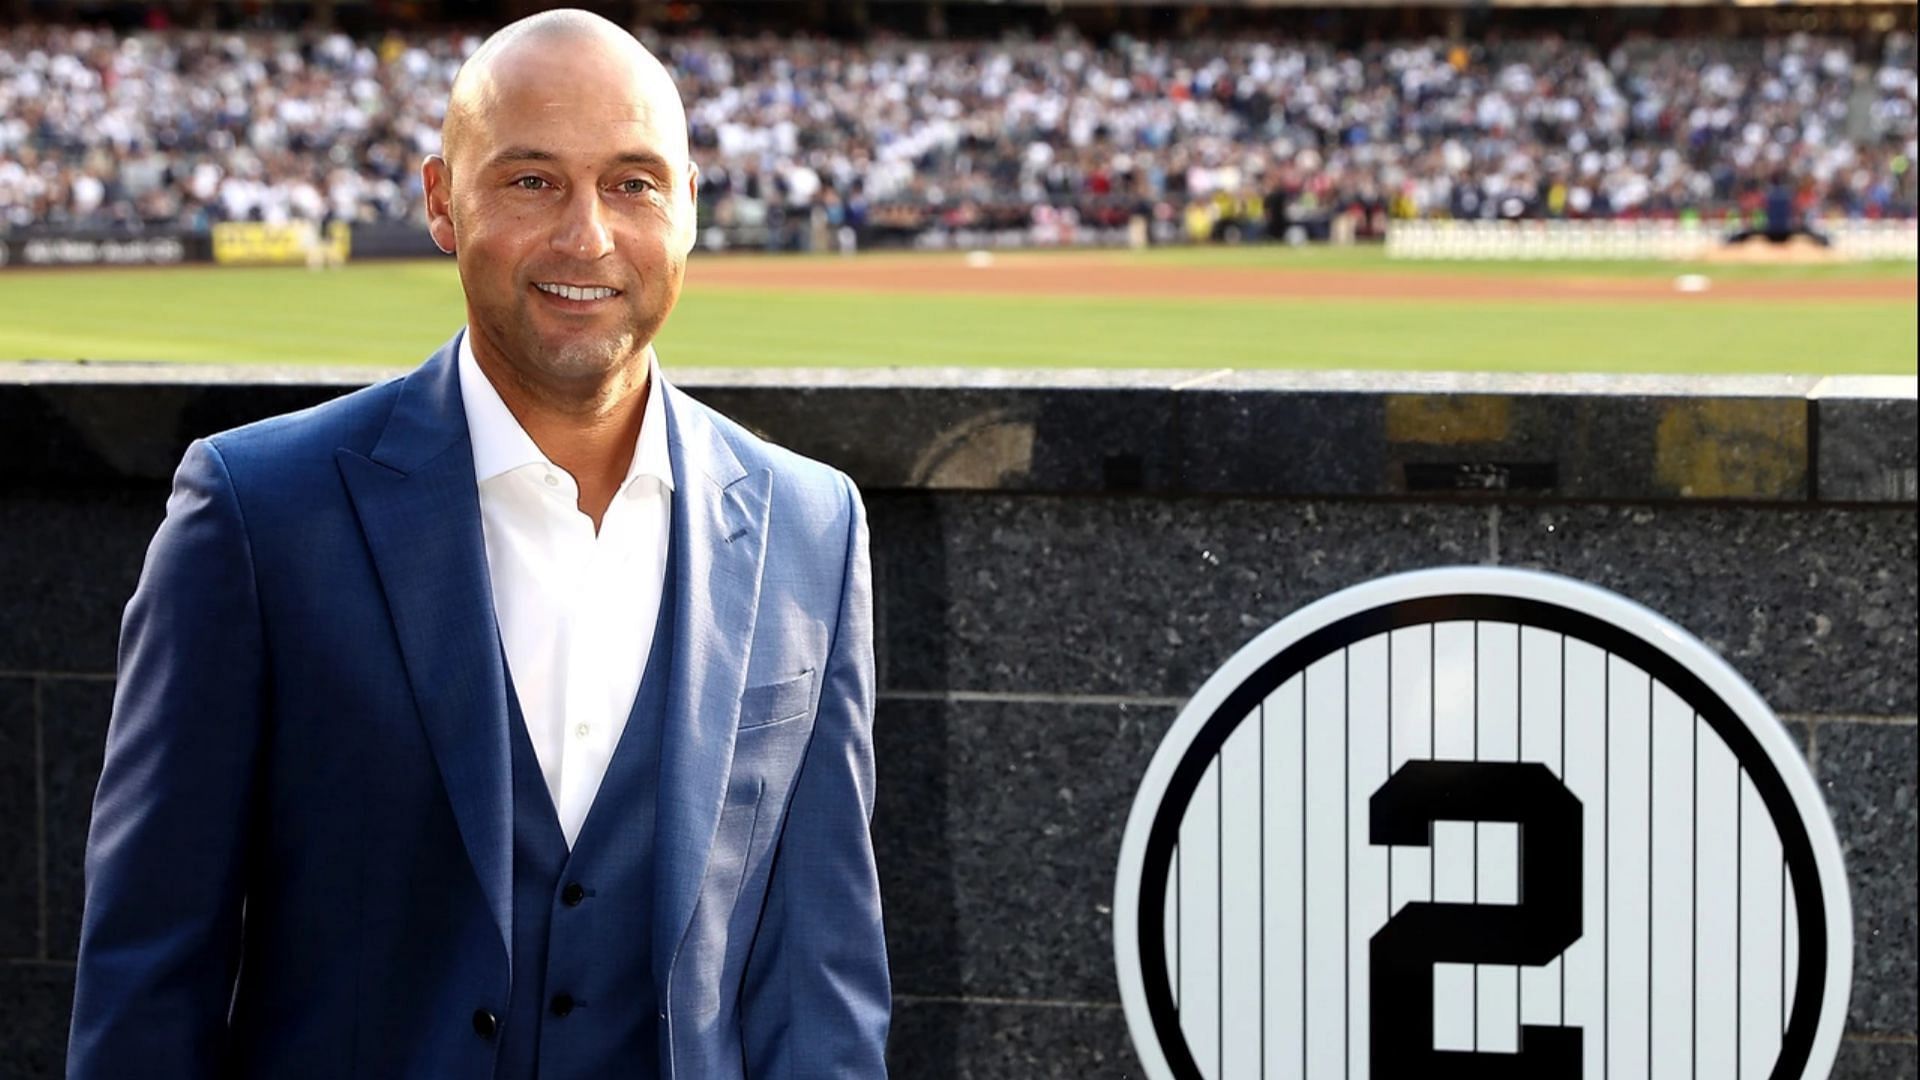 Derek Jeter shares rare glimpse of daughters Bella and Story as he